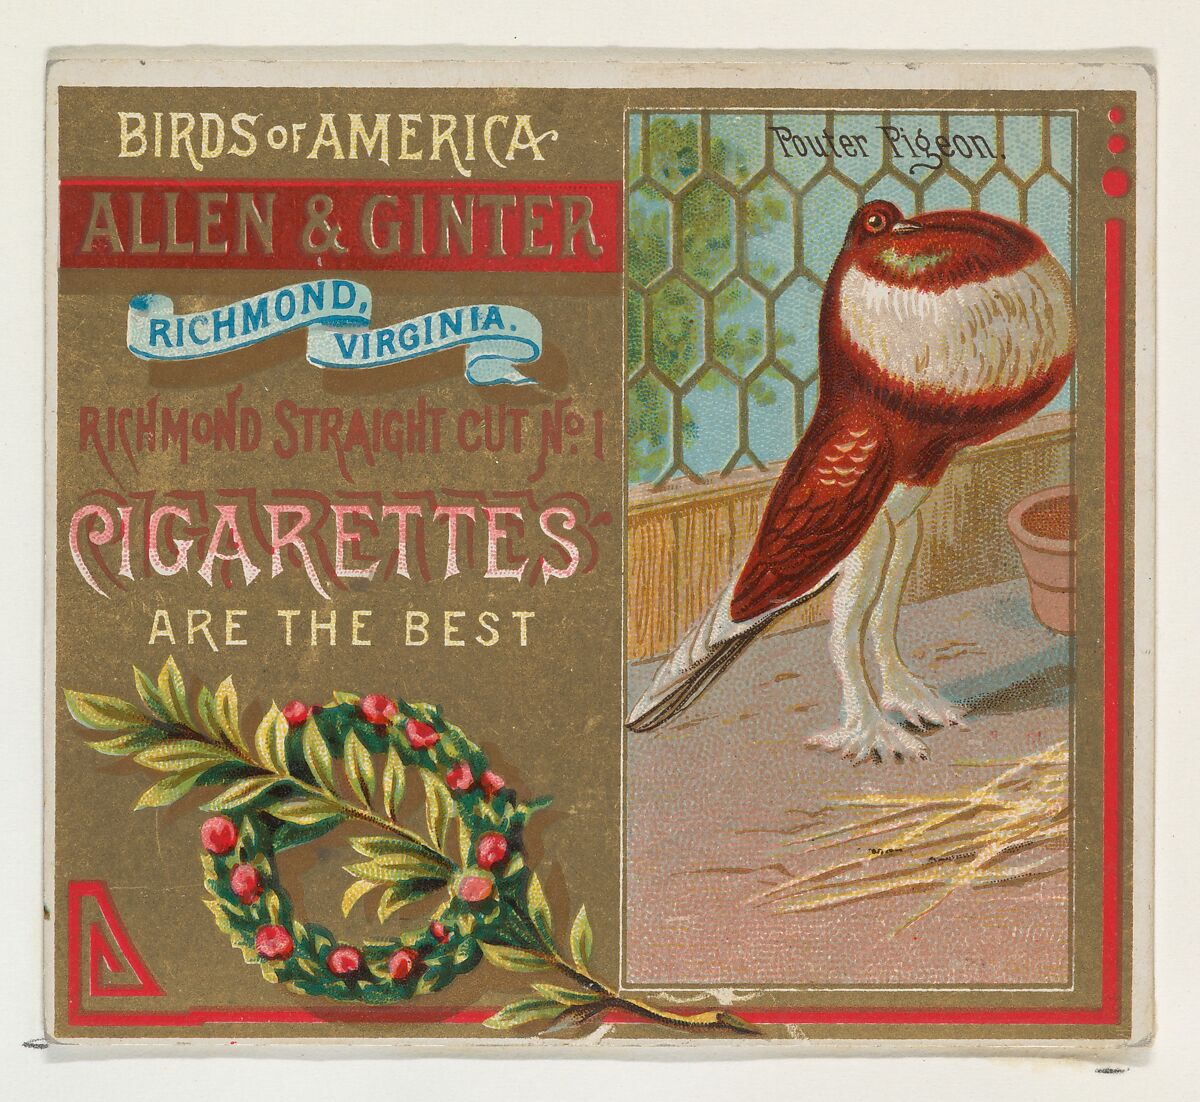 Pouter Pigeon, from the Birds of America series (N37) for Allen & Ginter Cigarettes, Issued by Allen &amp; Ginter (American, Richmond, Virginia), Commercial color lithograph 